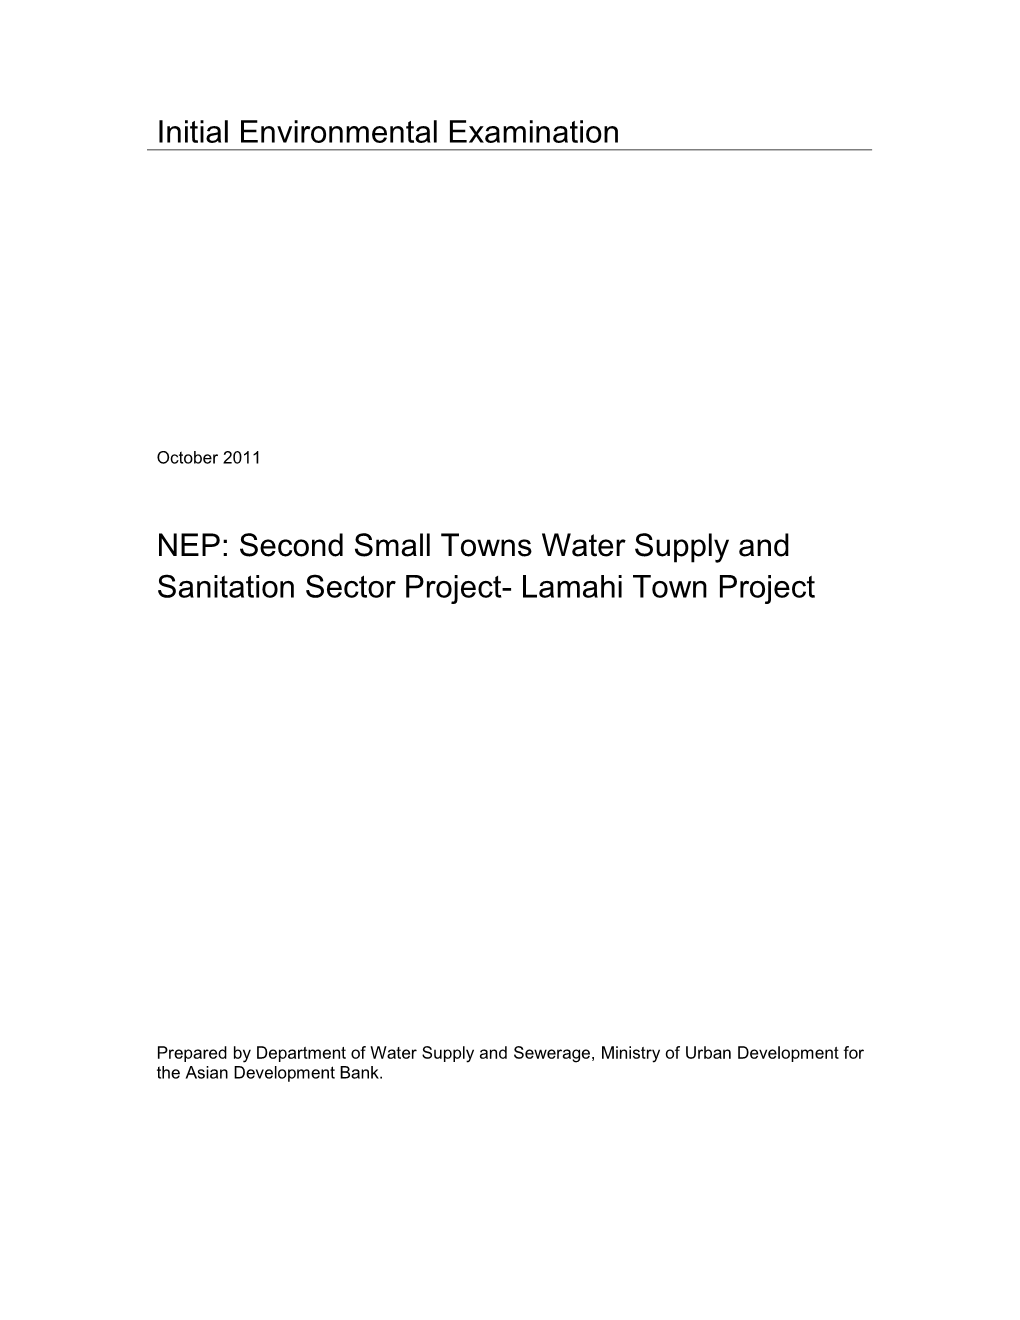 41022-022: Second Small Towns Water Supply and Sanitation Sector Project